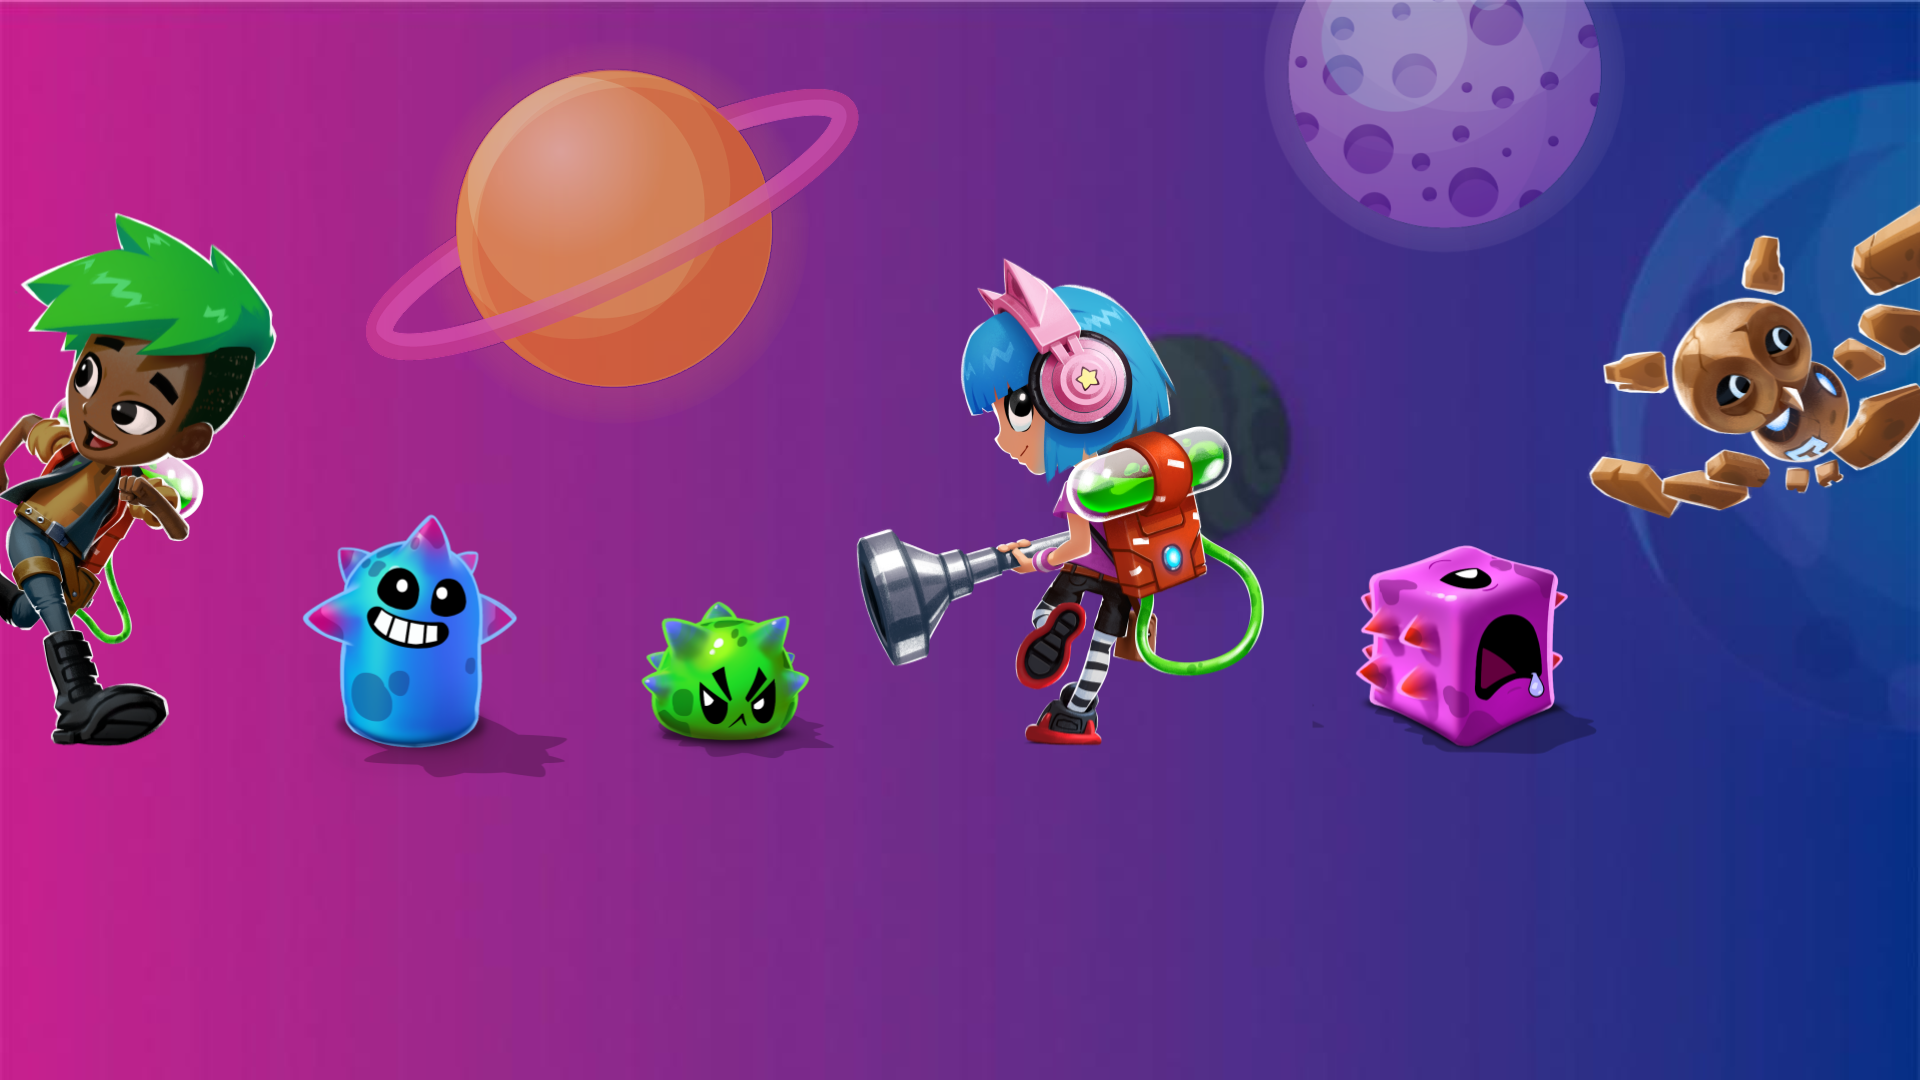 the image shows a female Lumi Nova character with blue hair in space, holding a vacuum cleaner and wearing pink headphones